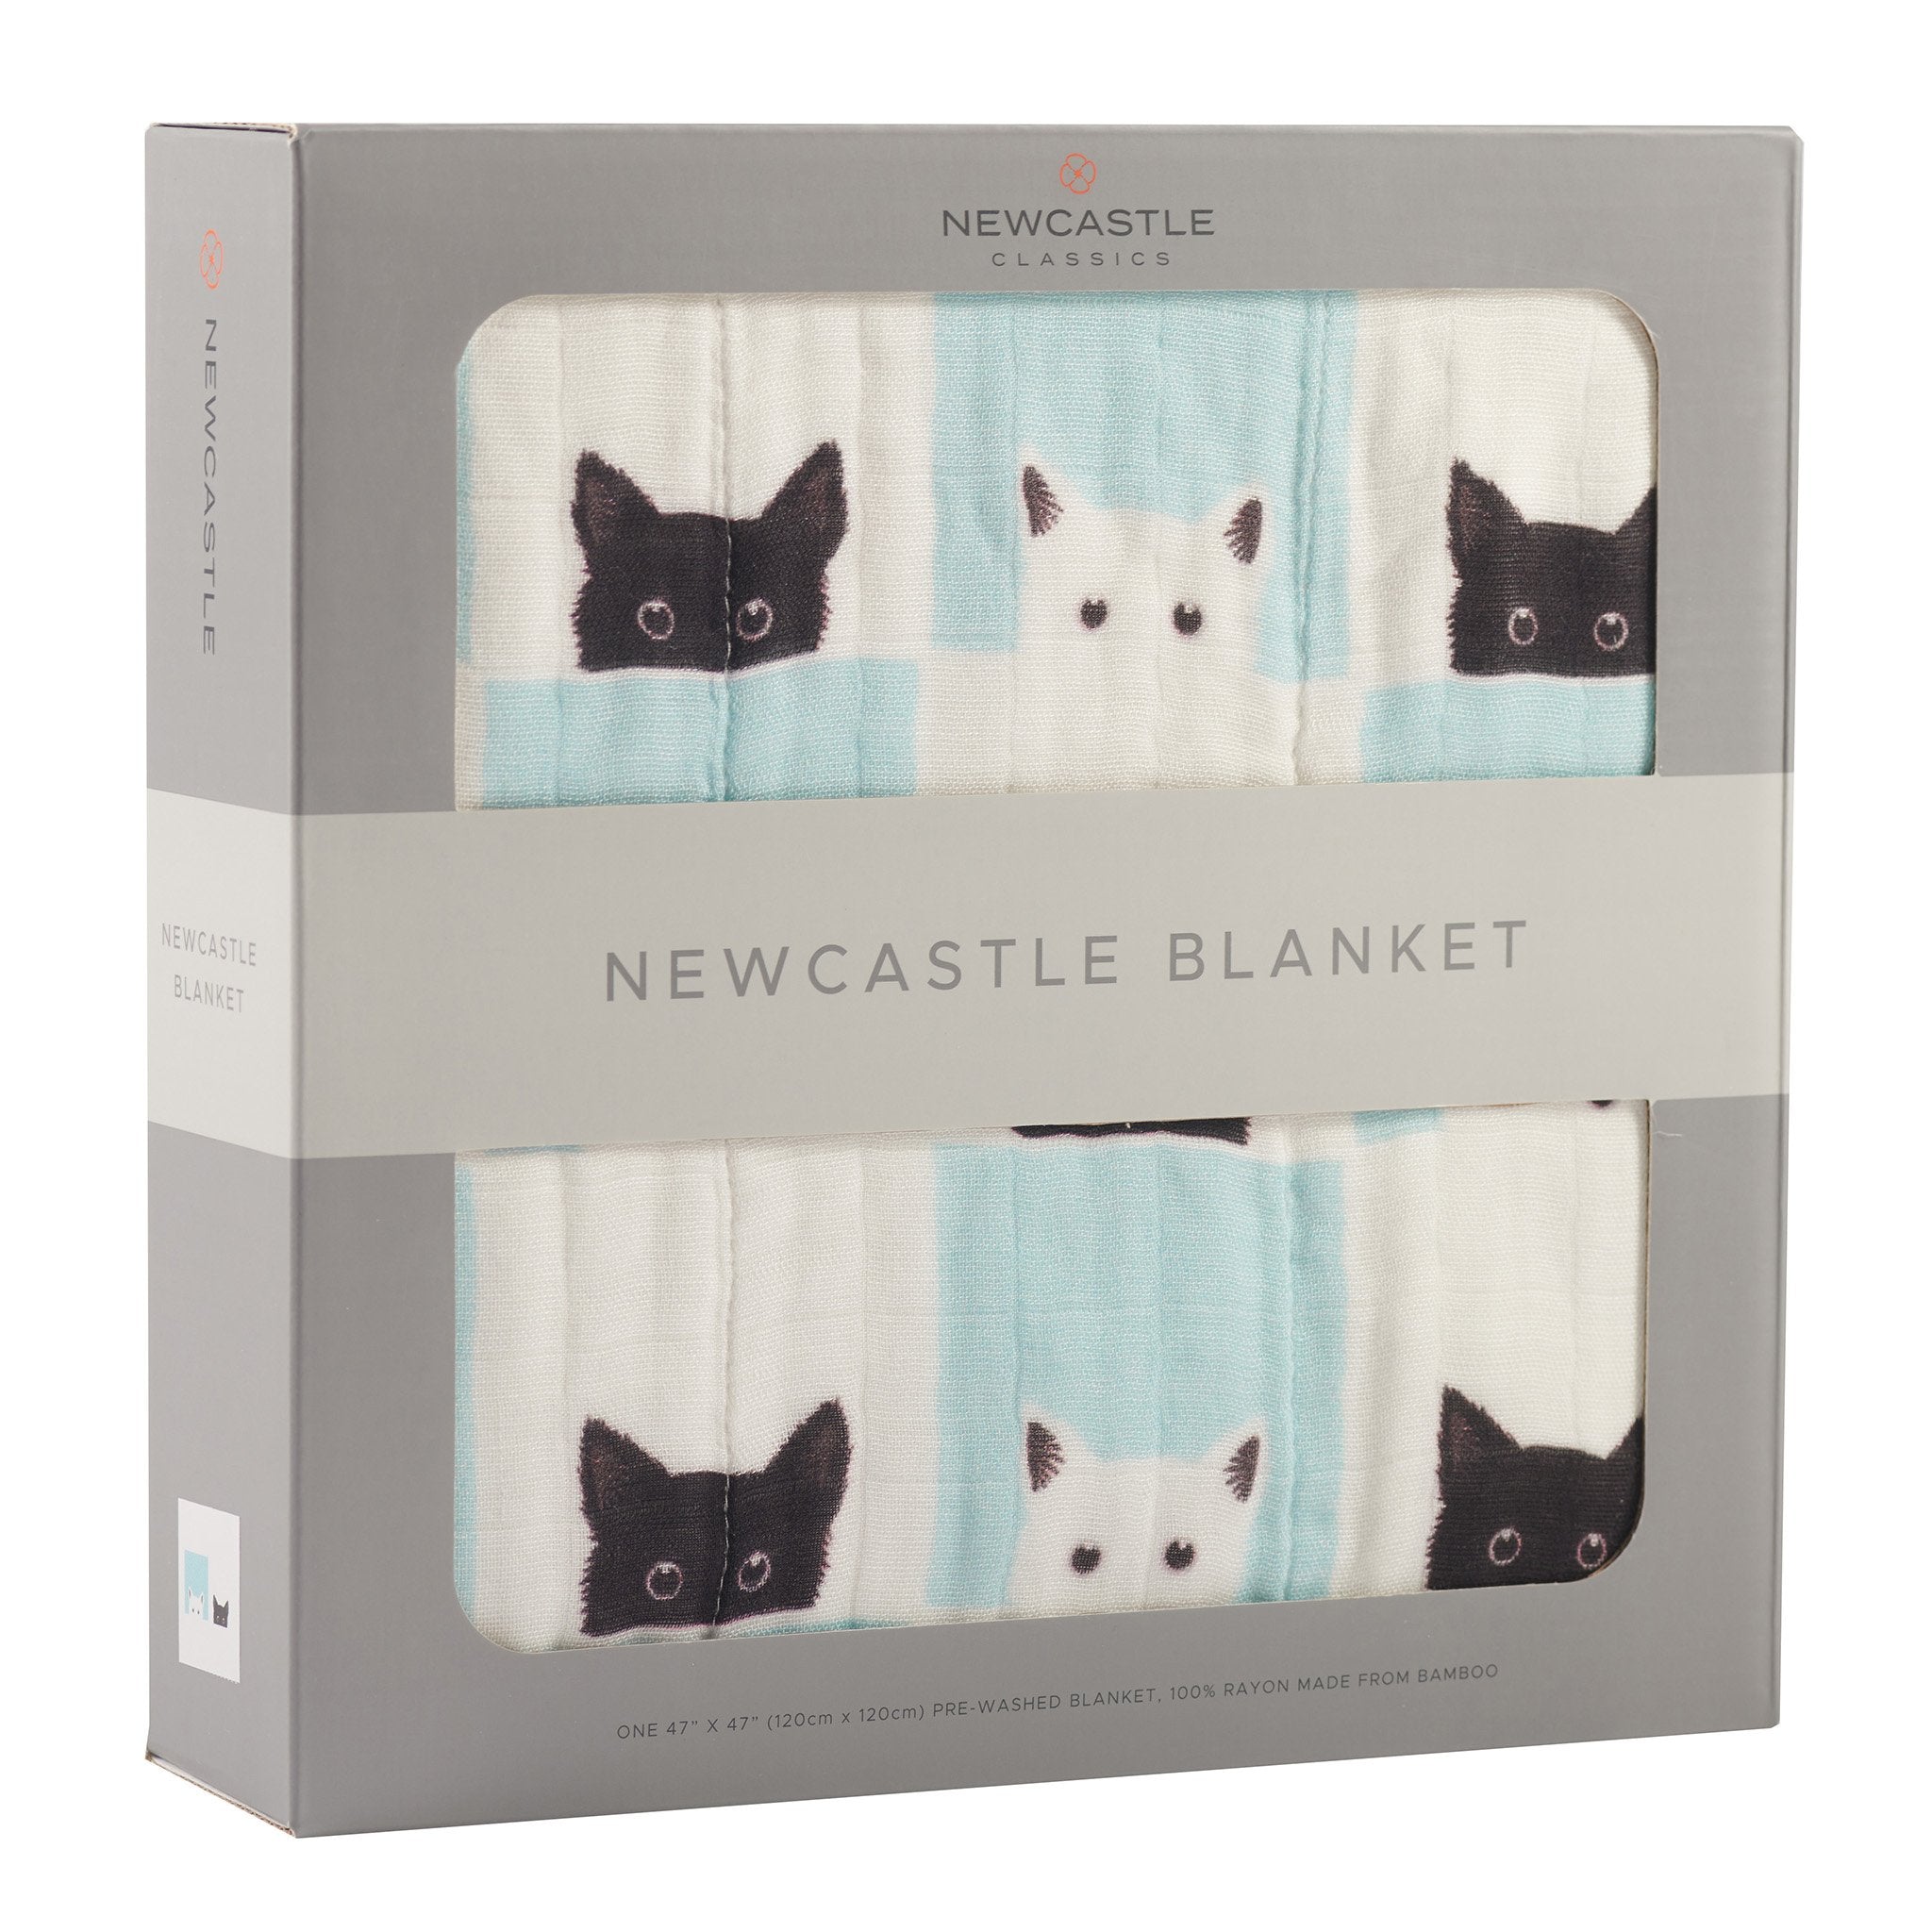 Black and white cat blanket packaged